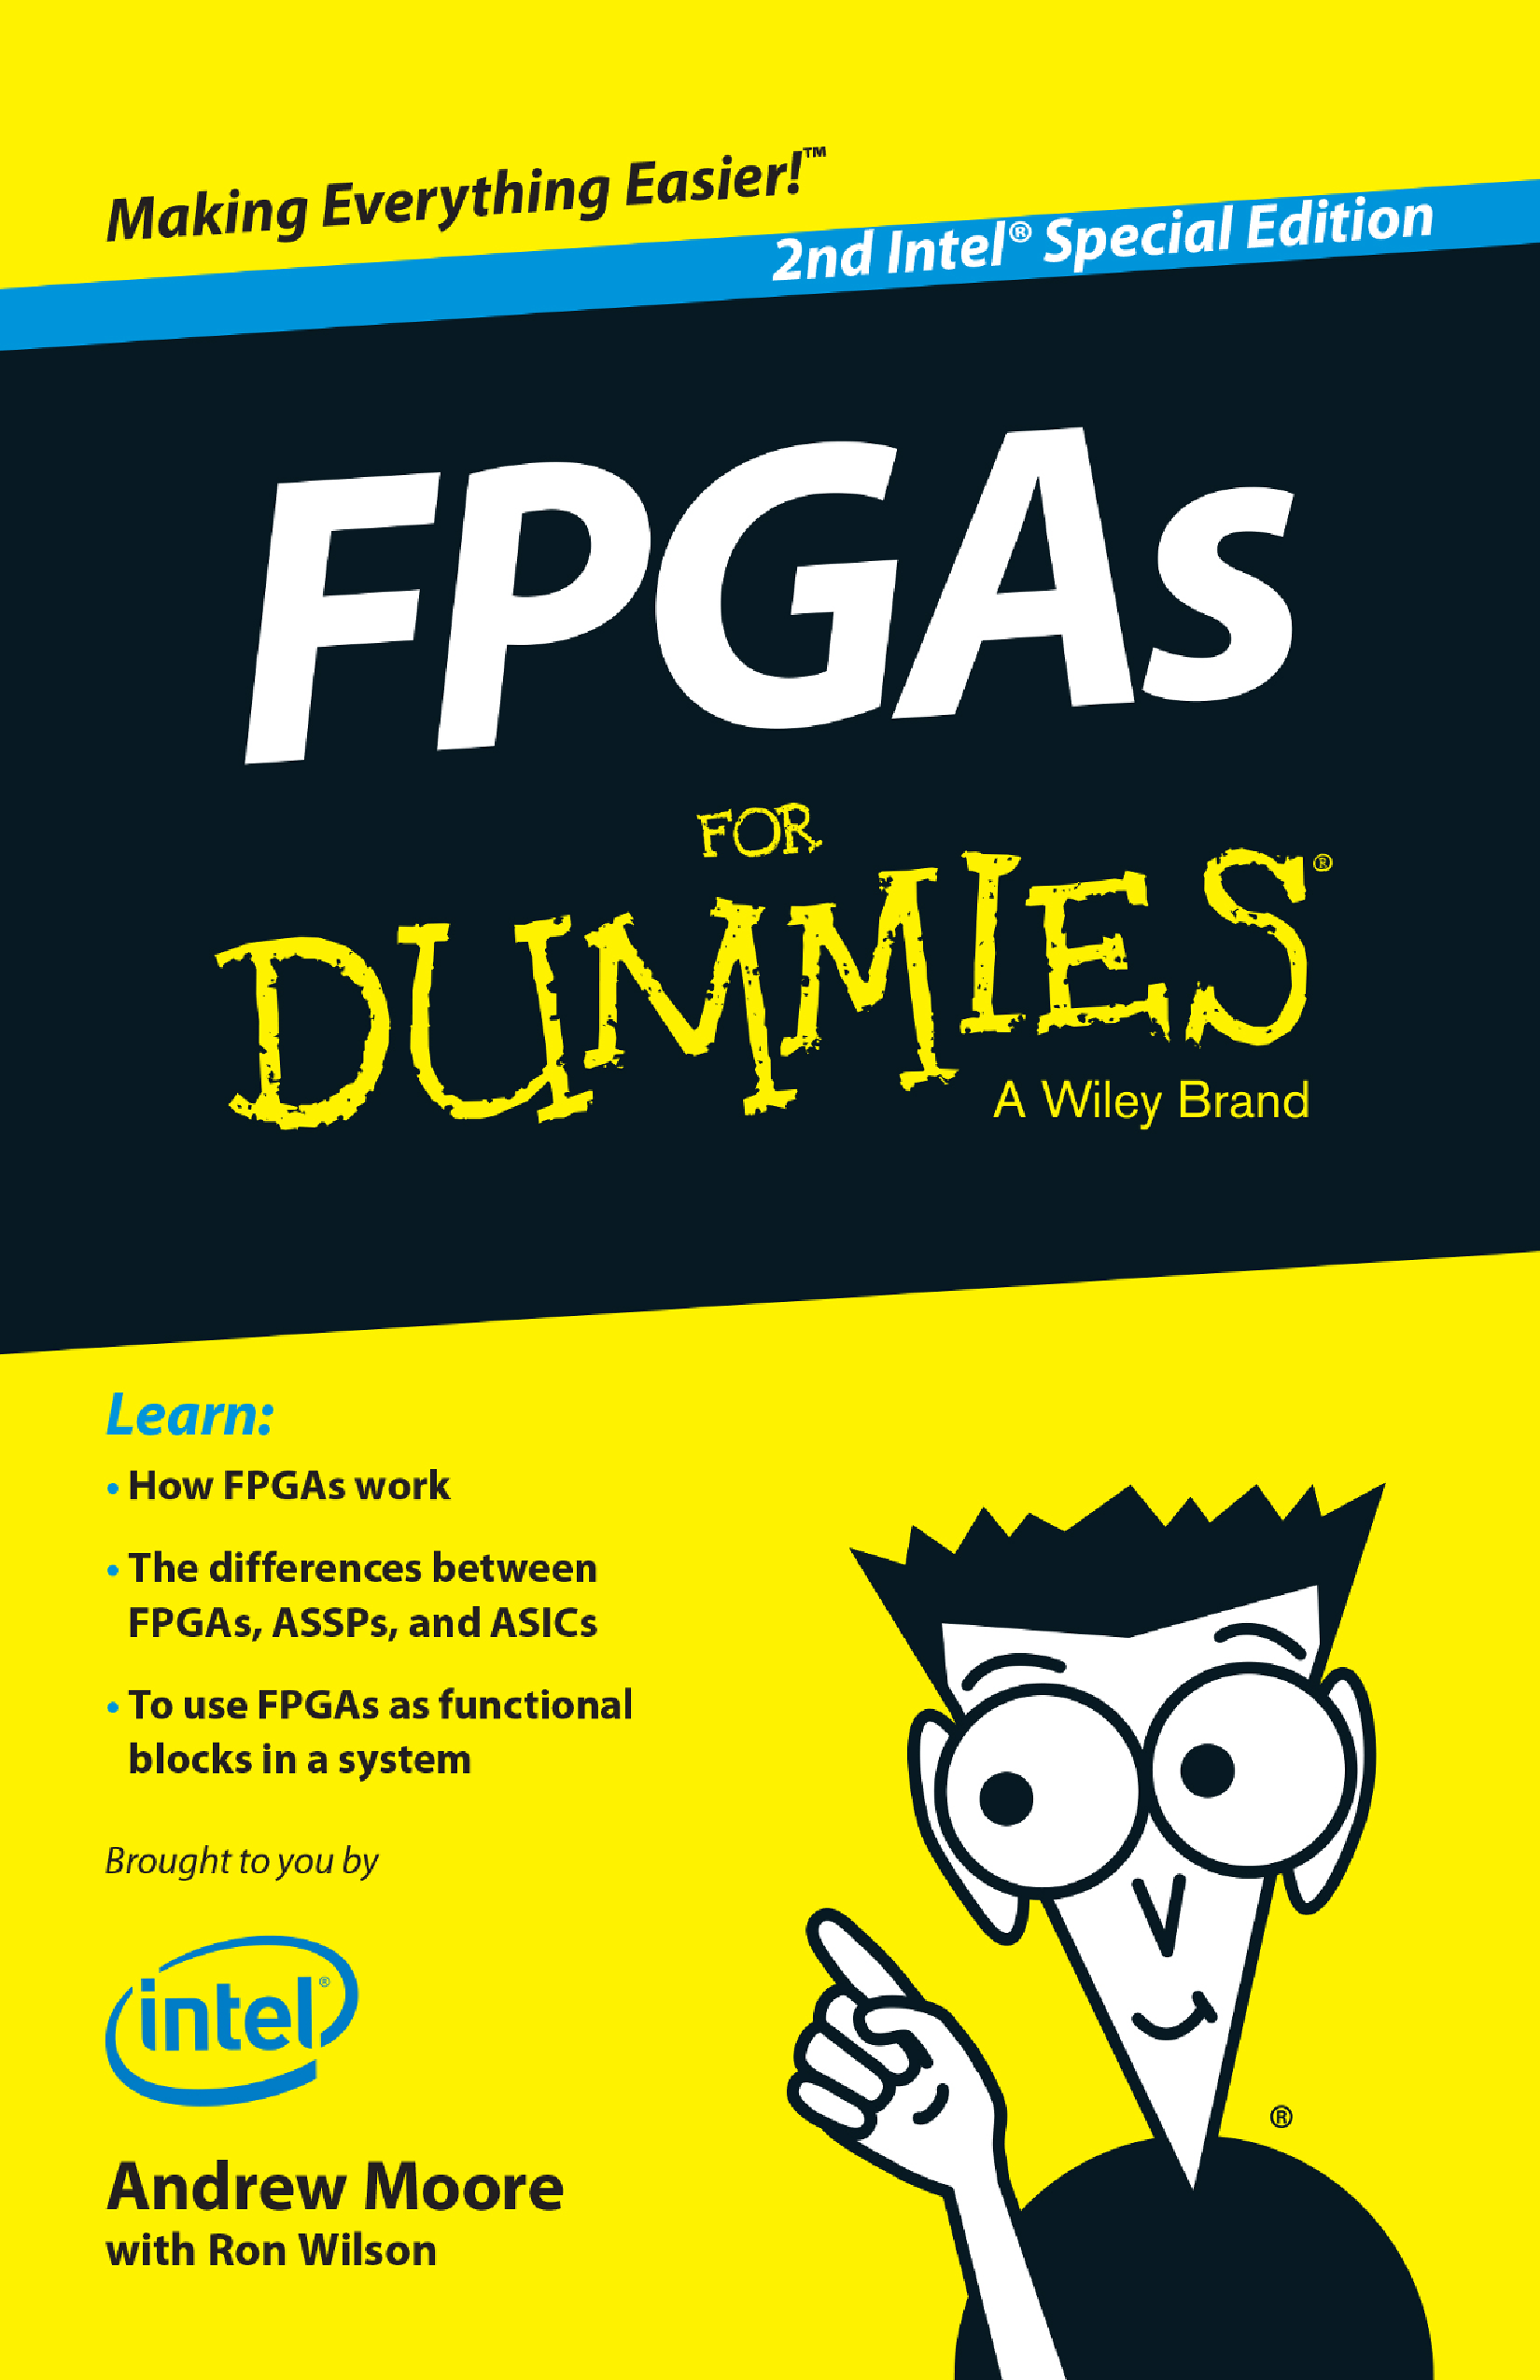 * FPGA for Dummies 2nd Intel Special Edition - Title (EN) *